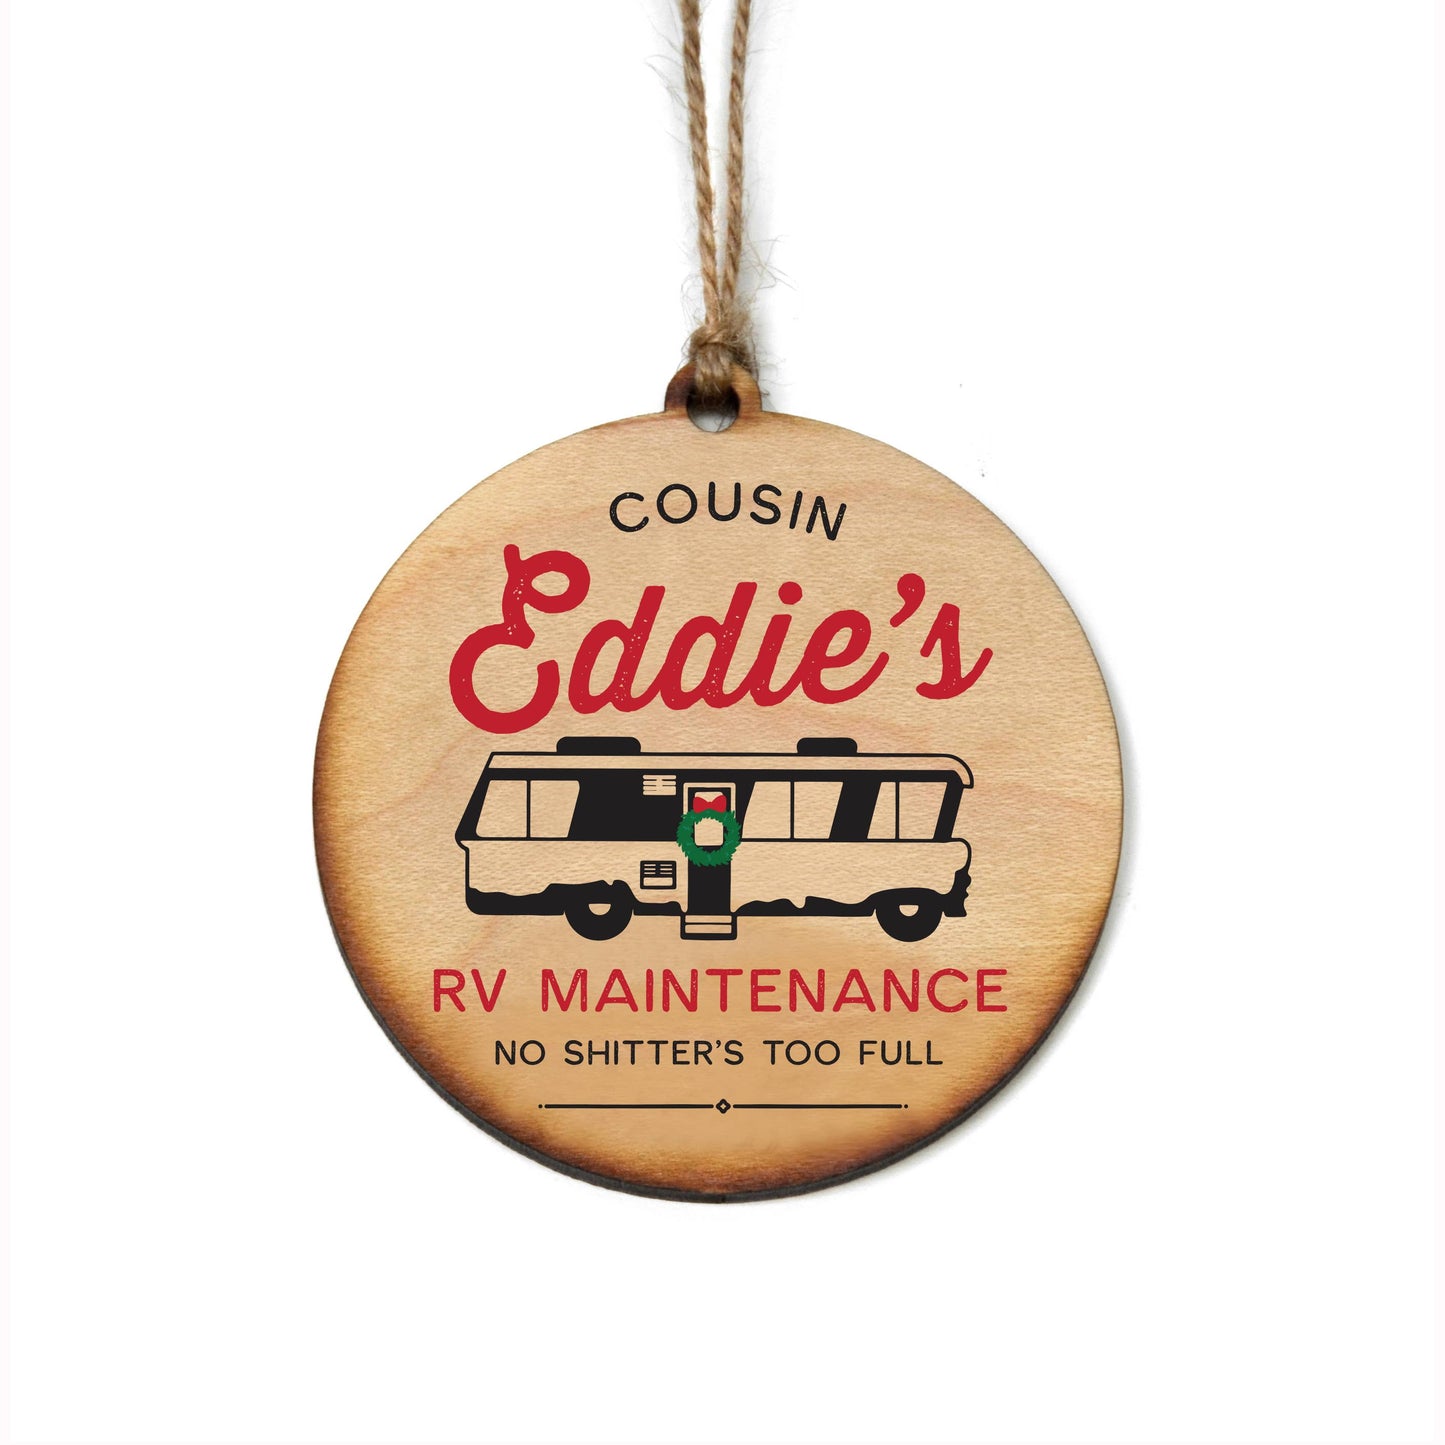 Cousin Eddies Holiday Ornament for Christmas Tree,